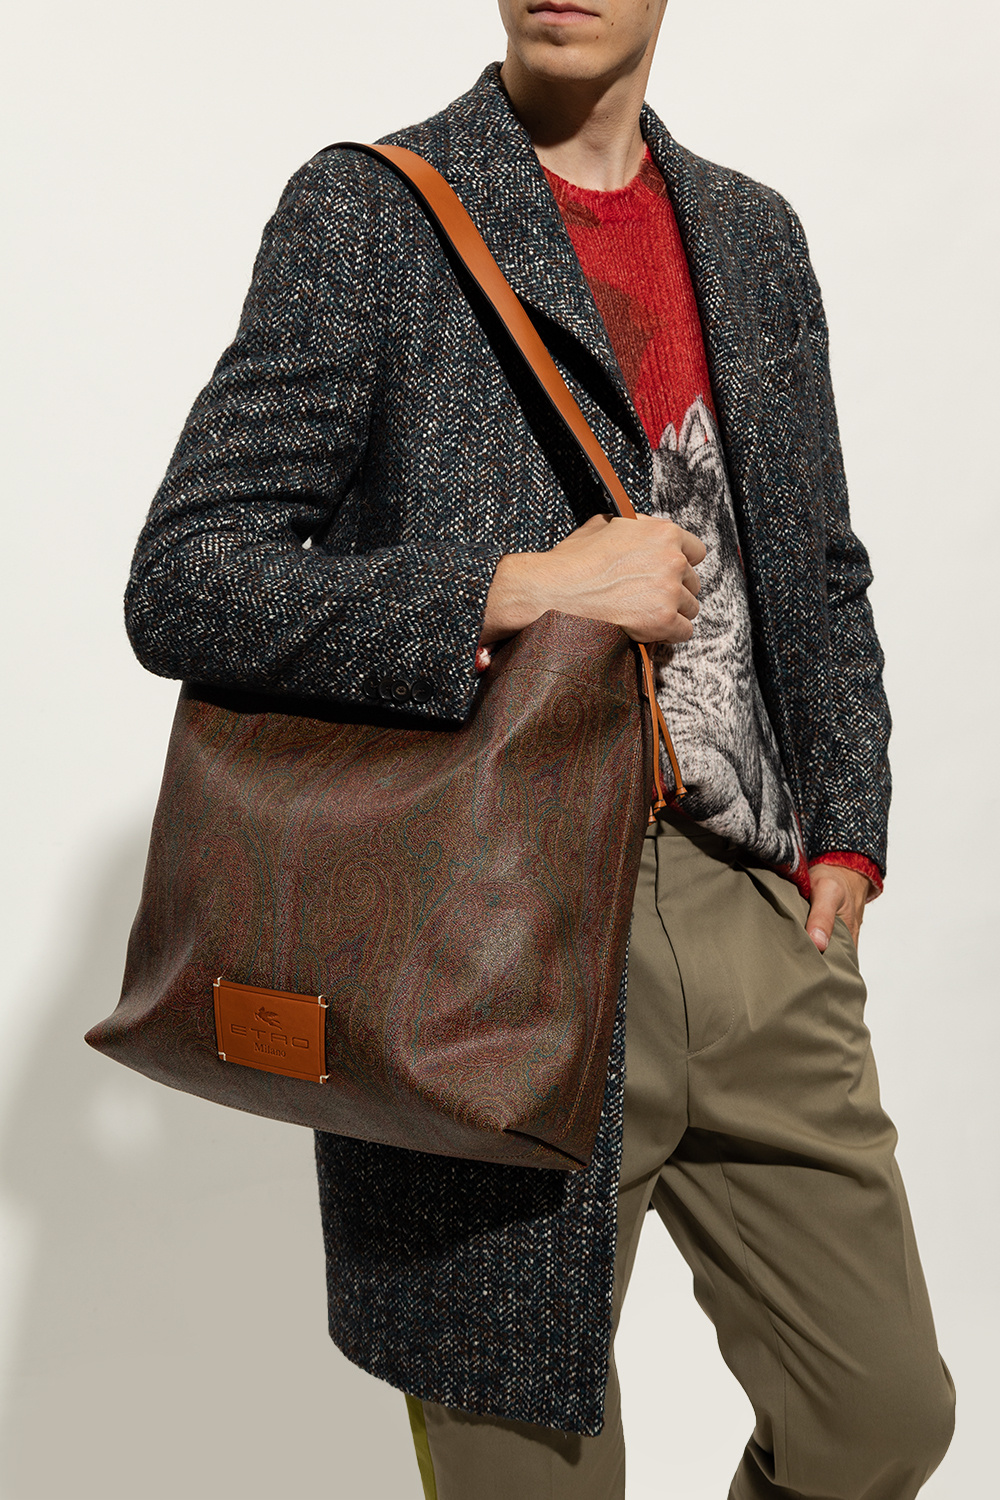 Etro there will be no race day bag check